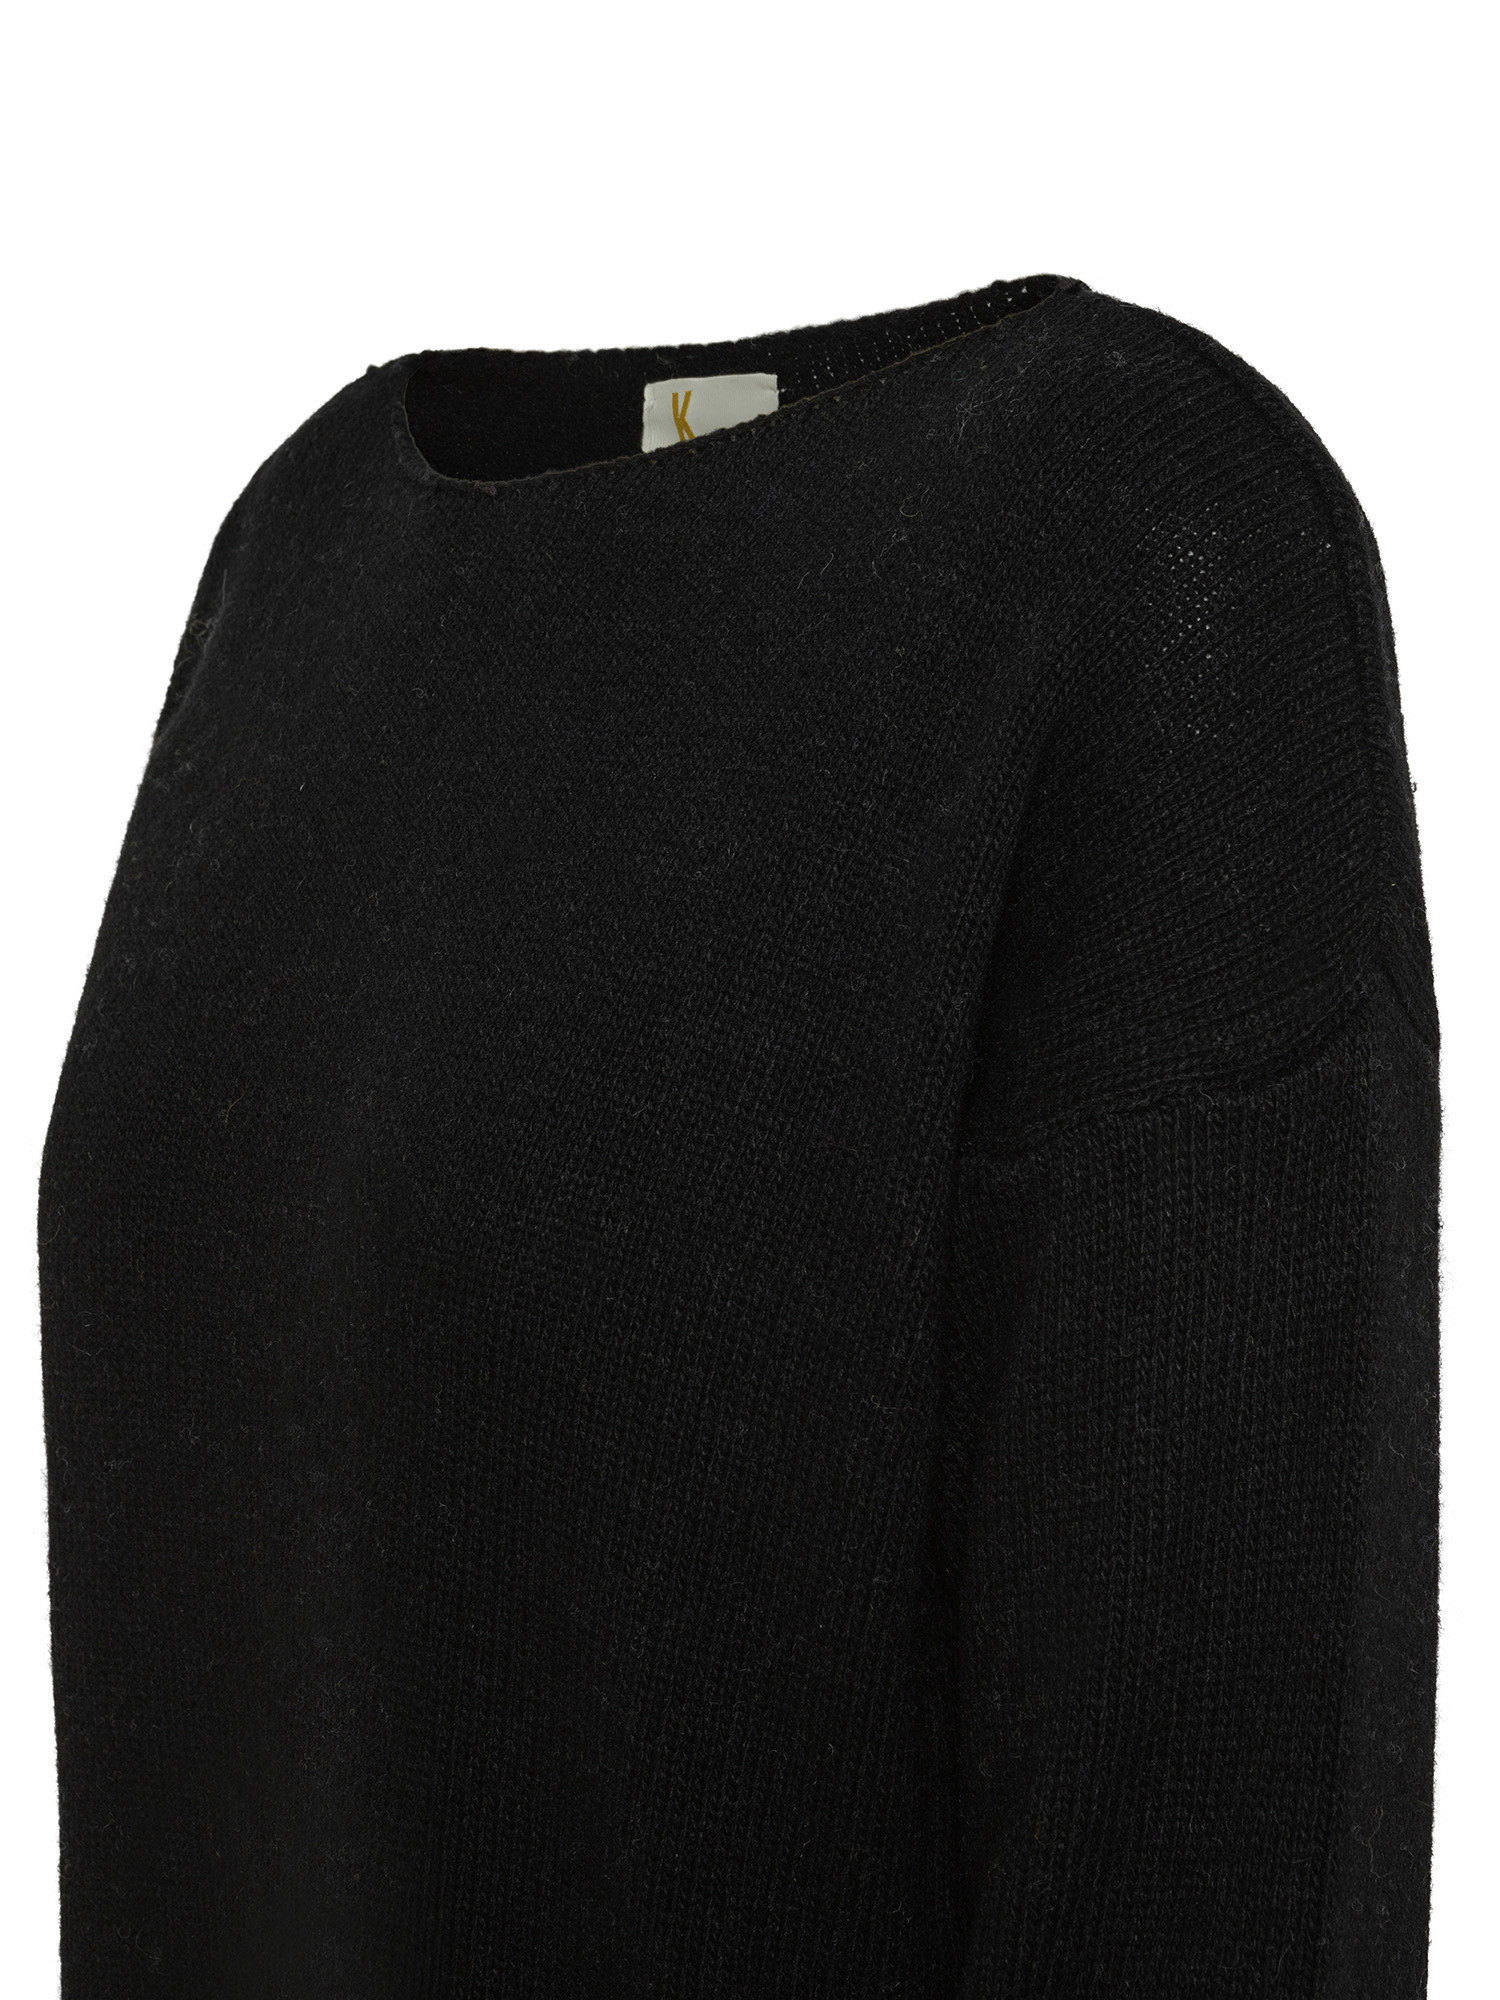 K Collection - Over sweater, Black, large image number 2